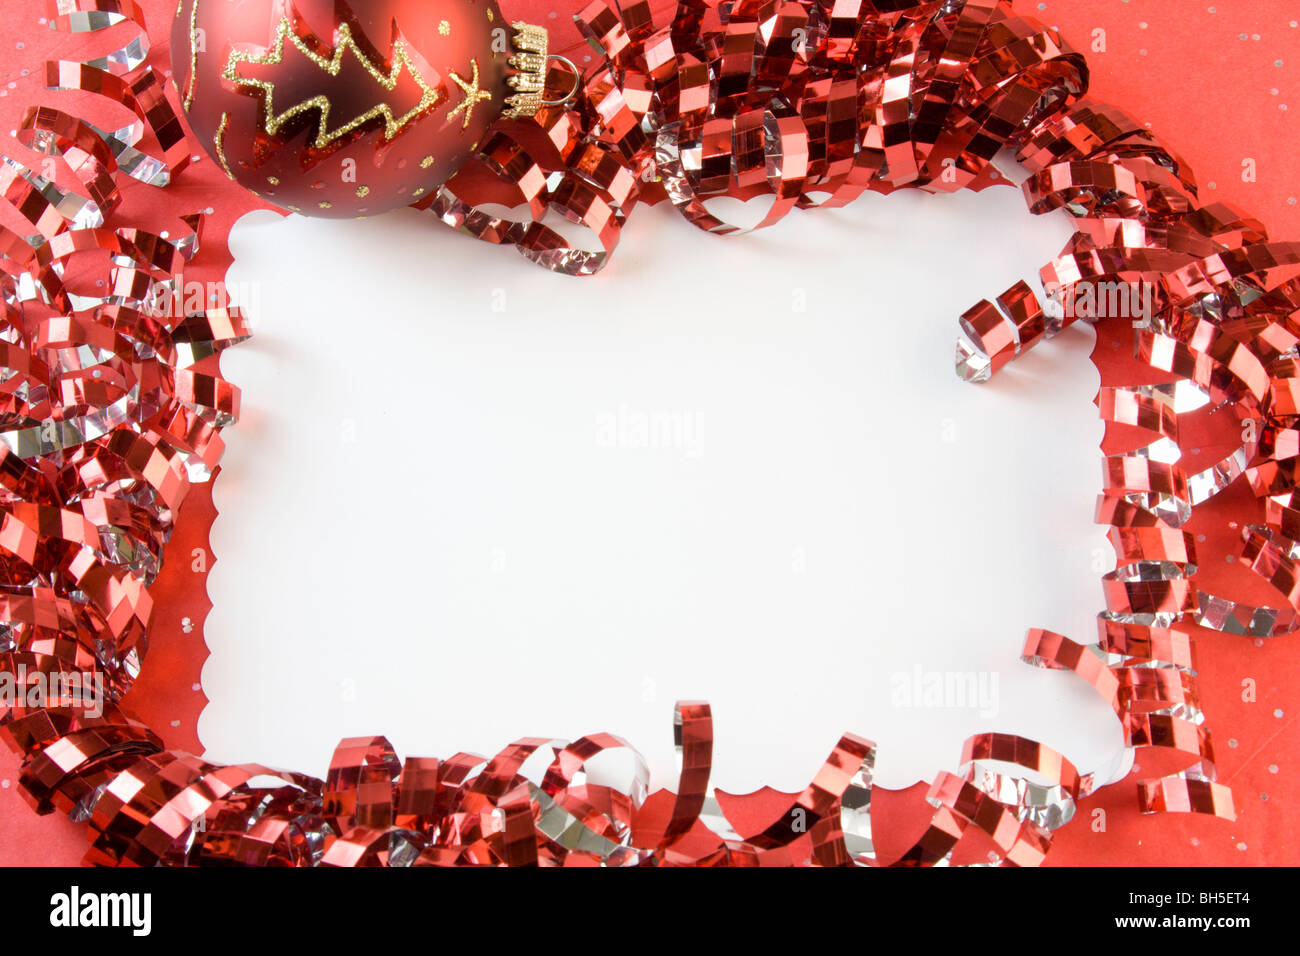 blank Christmas card with metallic red ribbon, ornament, and copy space Stock Photo